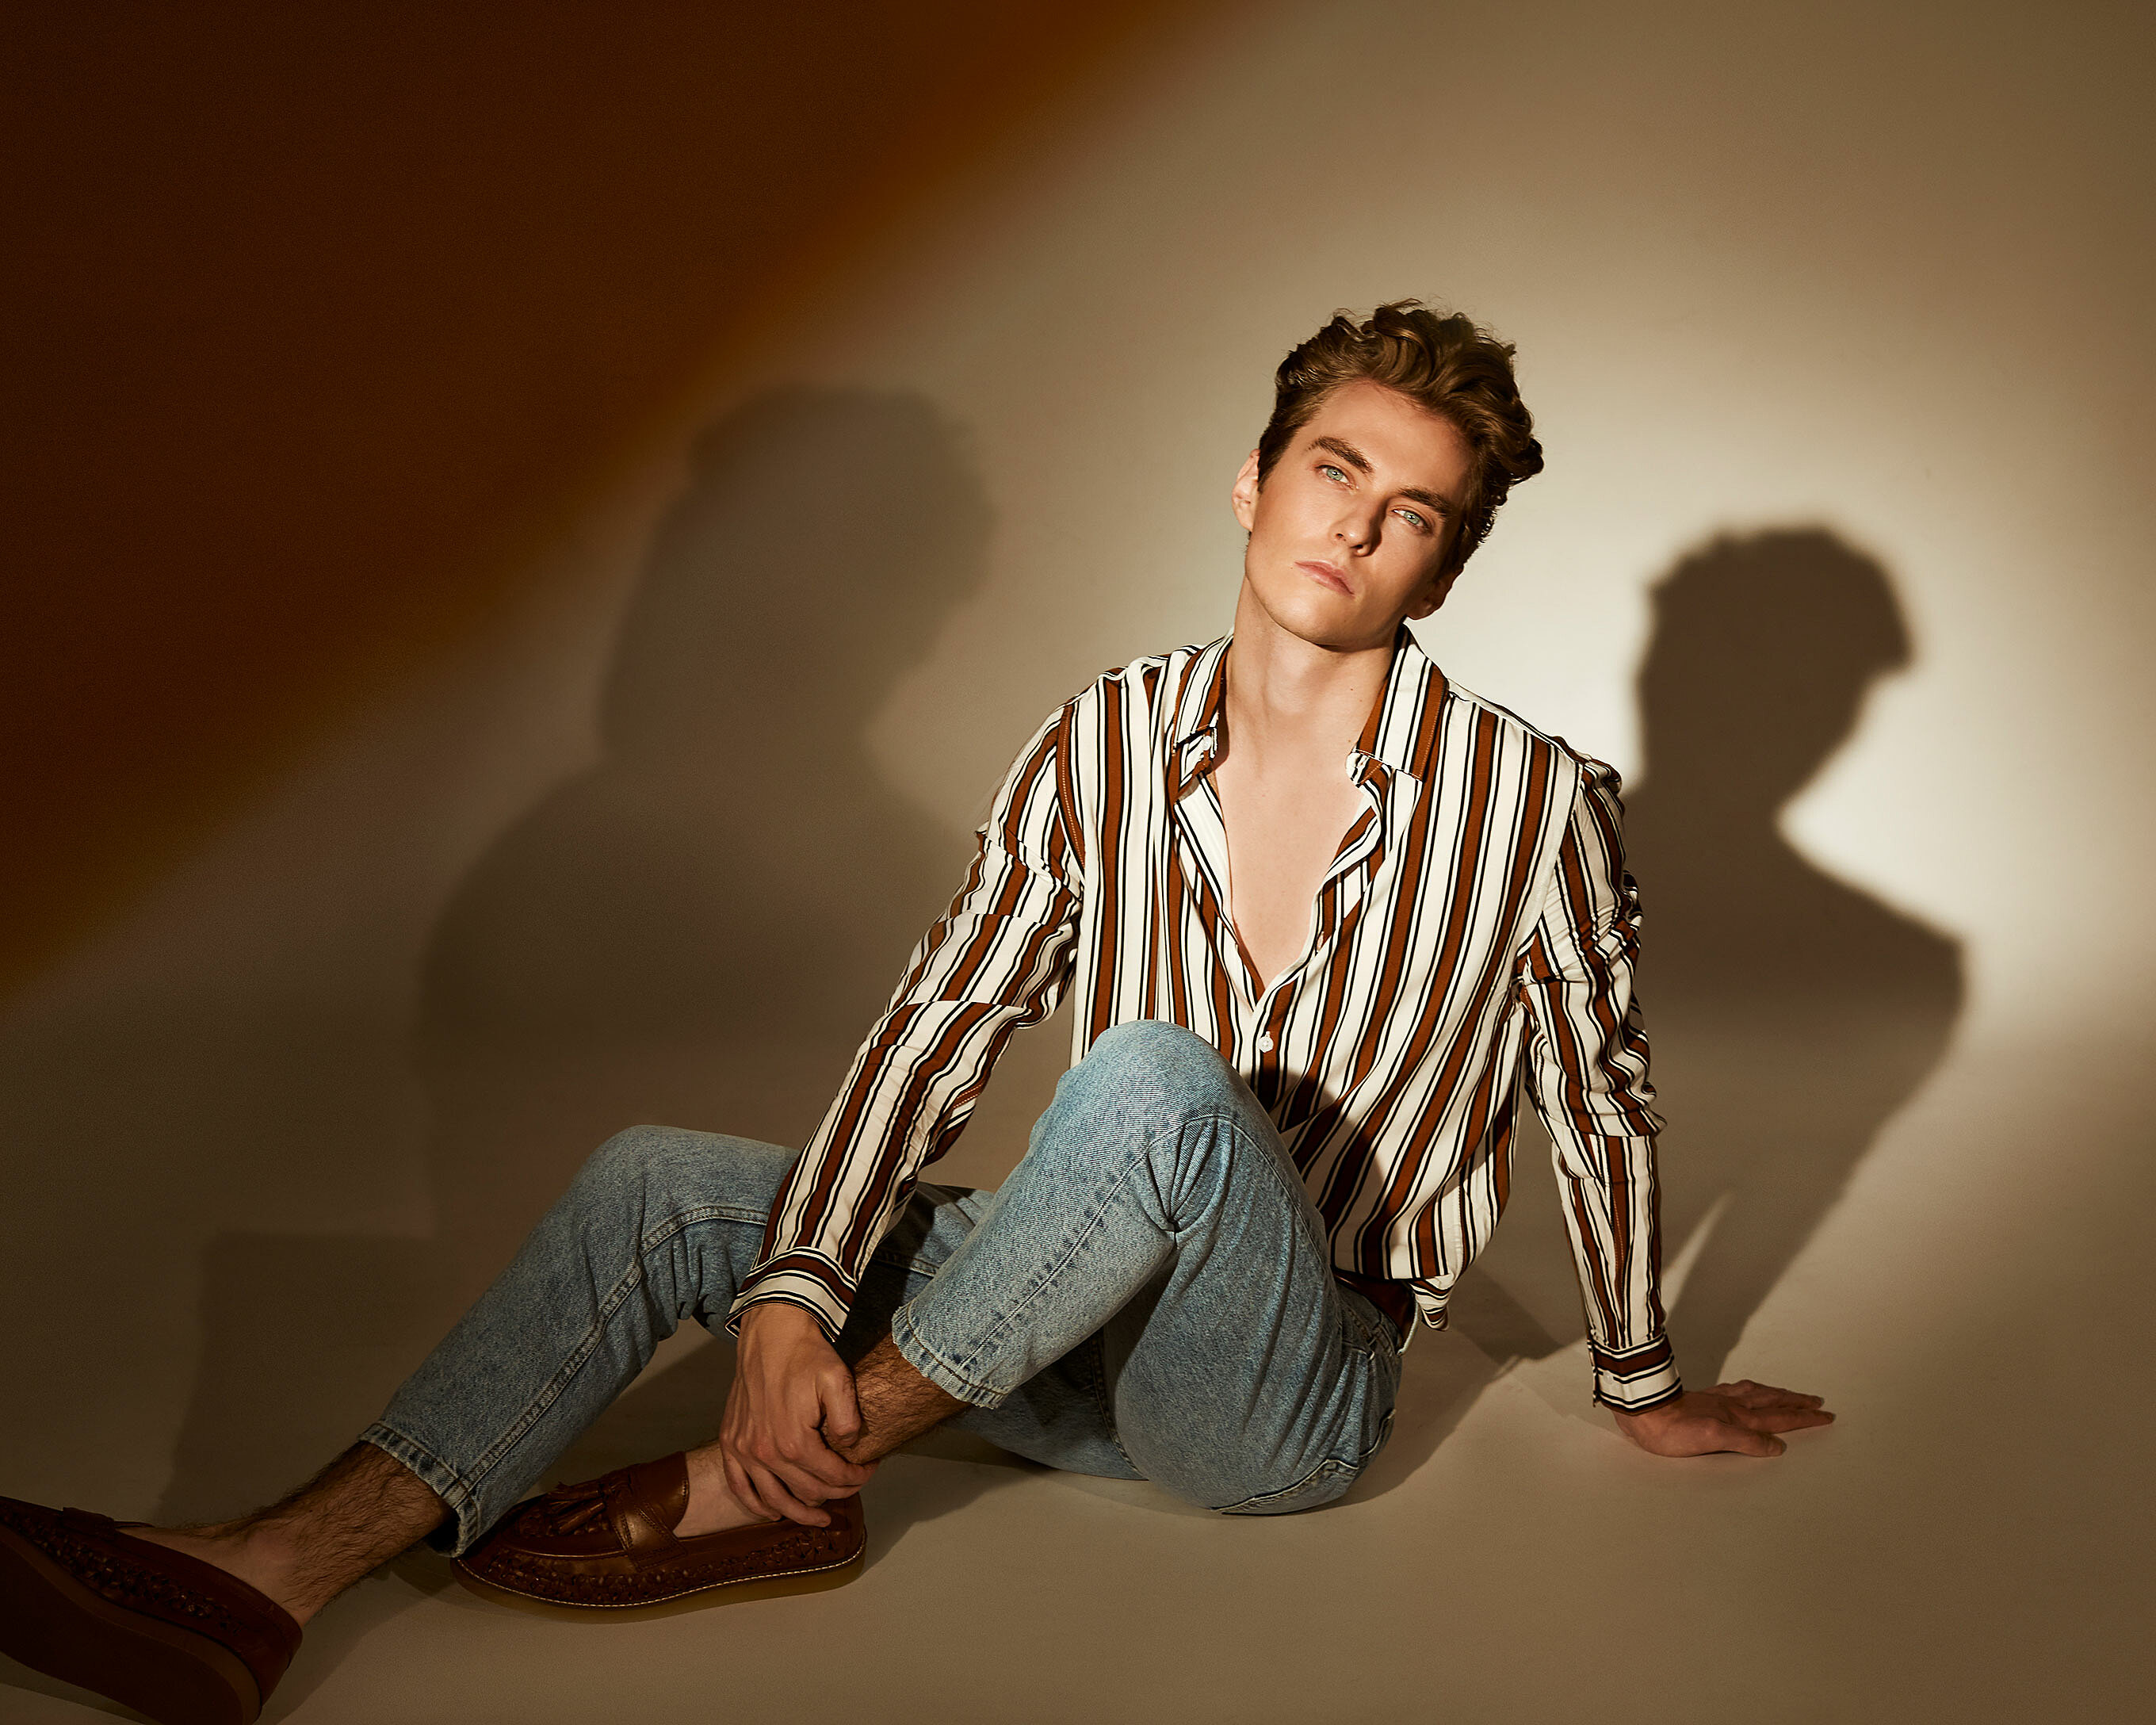 A male model sits on the floor with a striped shirt and denim trousers